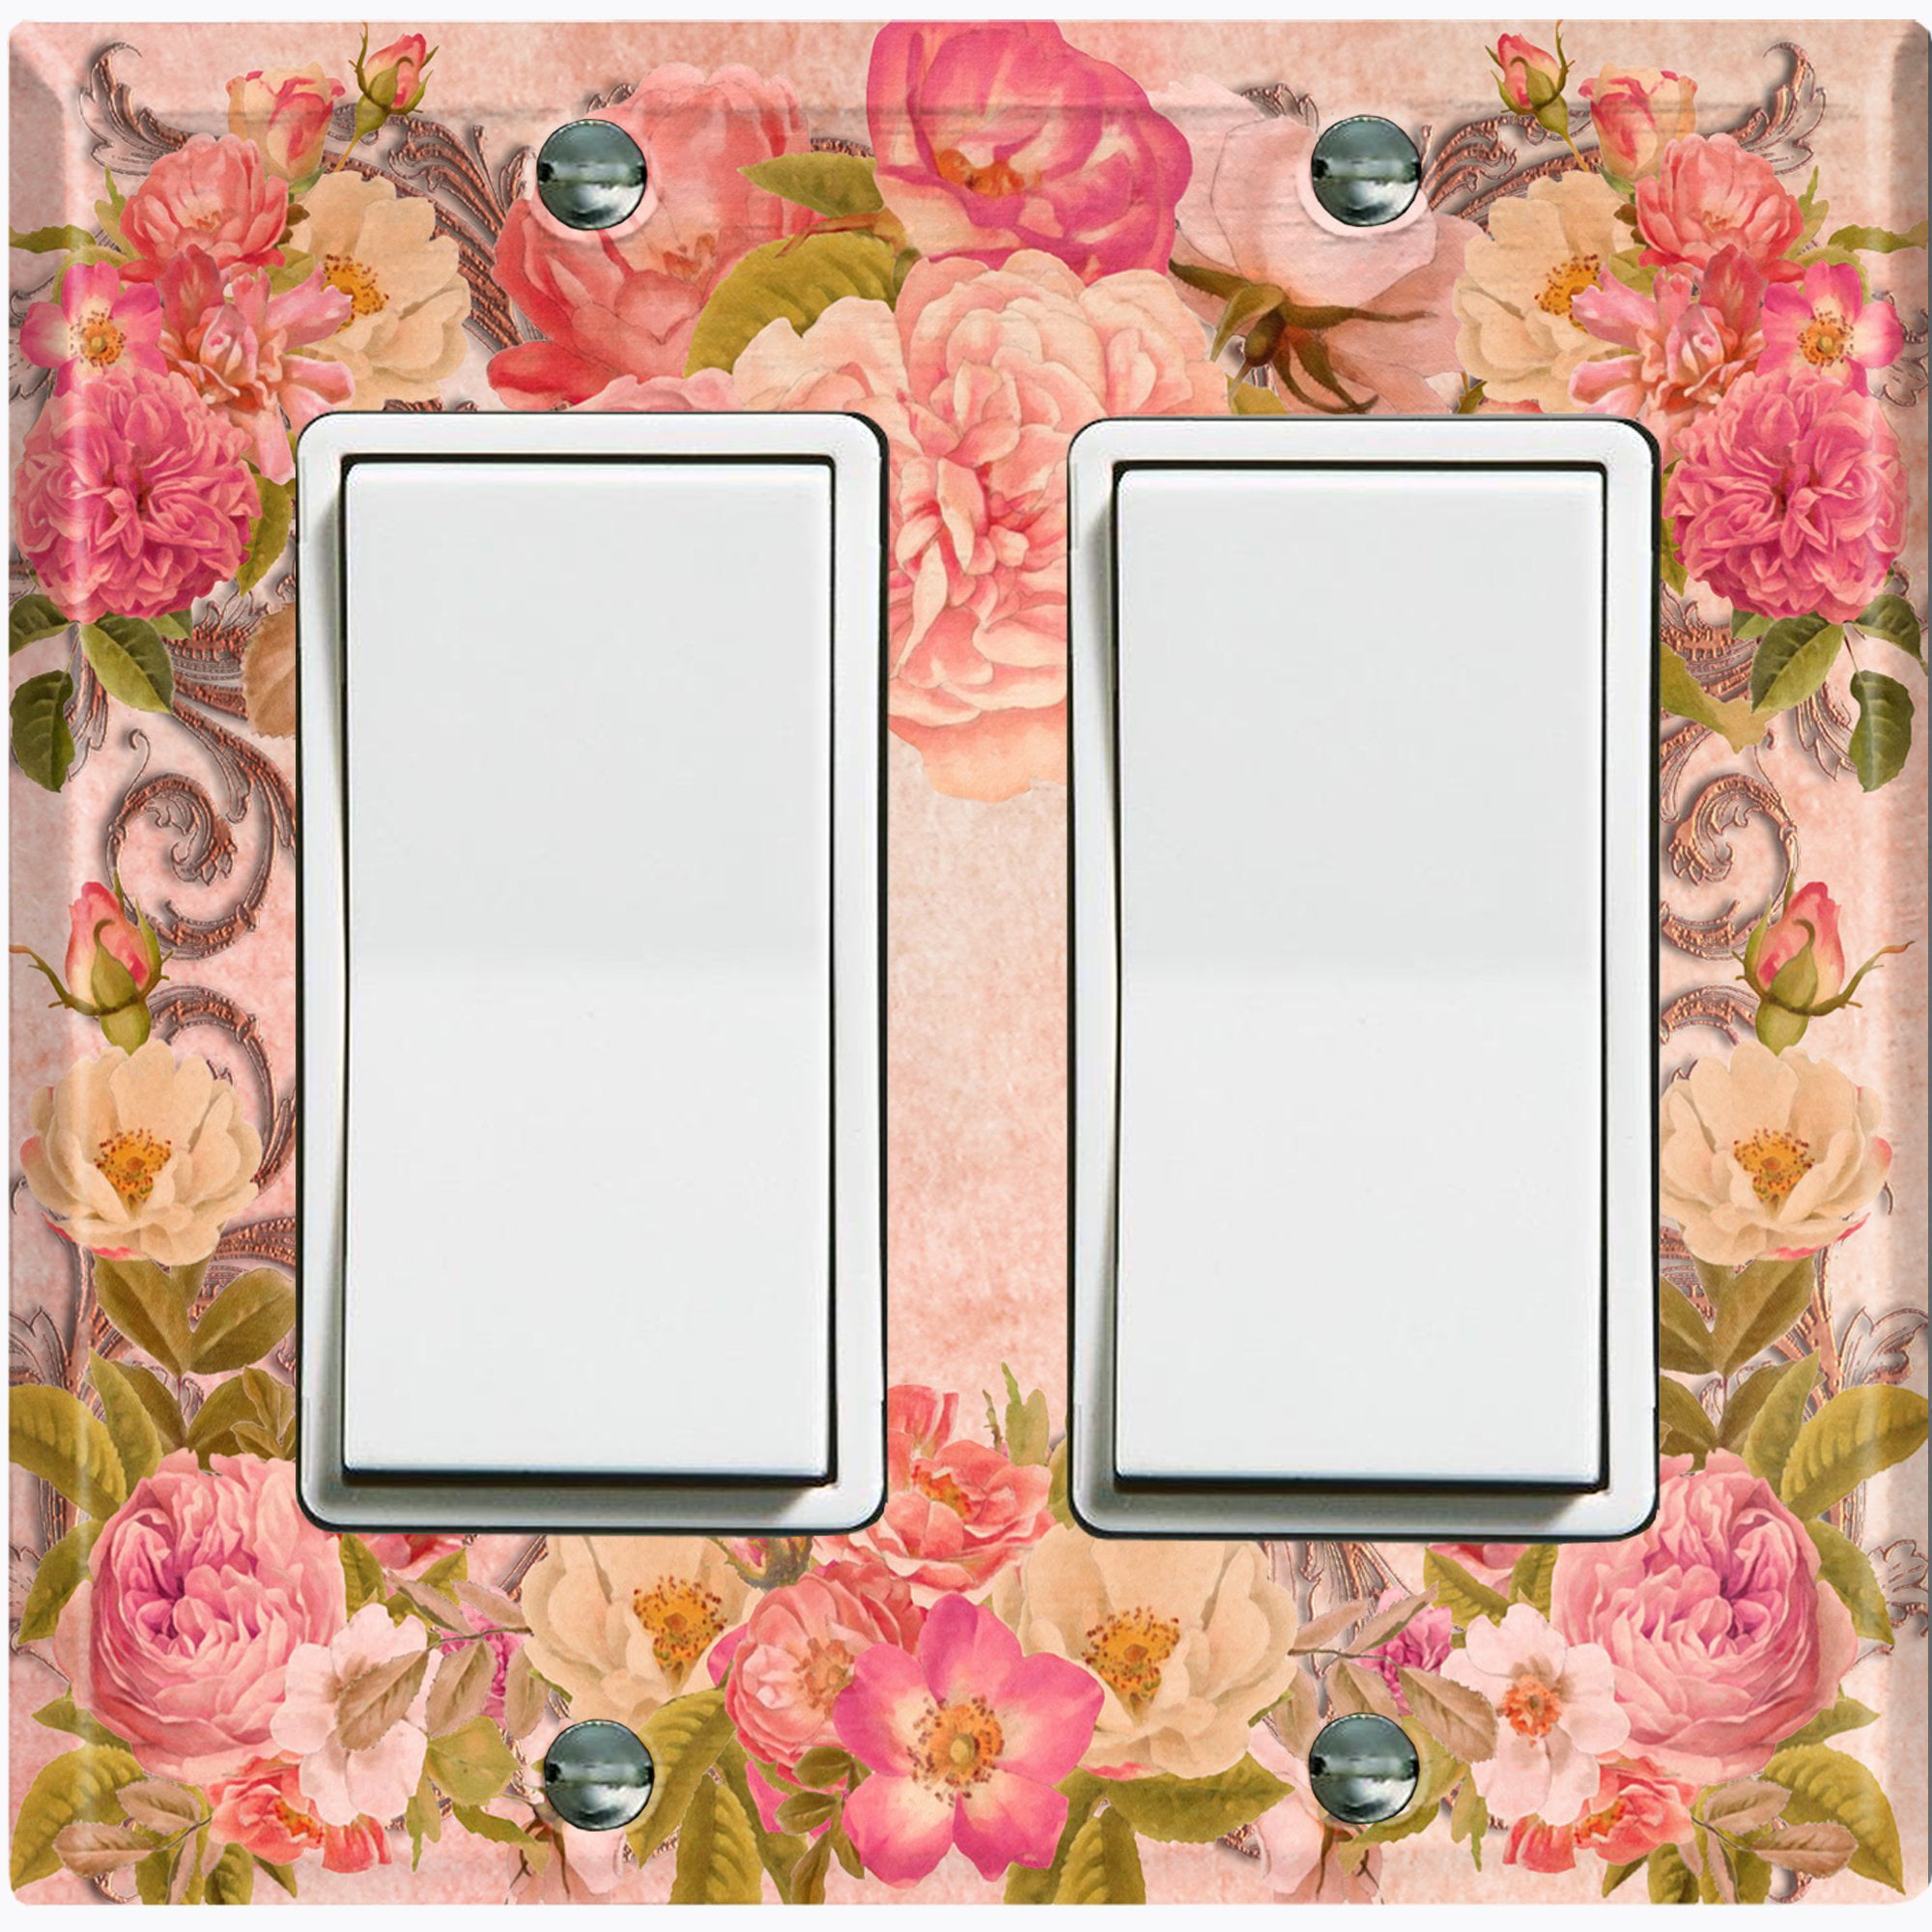 Metal Light Switch Cover Wall Plate Vintage White Rose Flower Frame Pink ROS024 